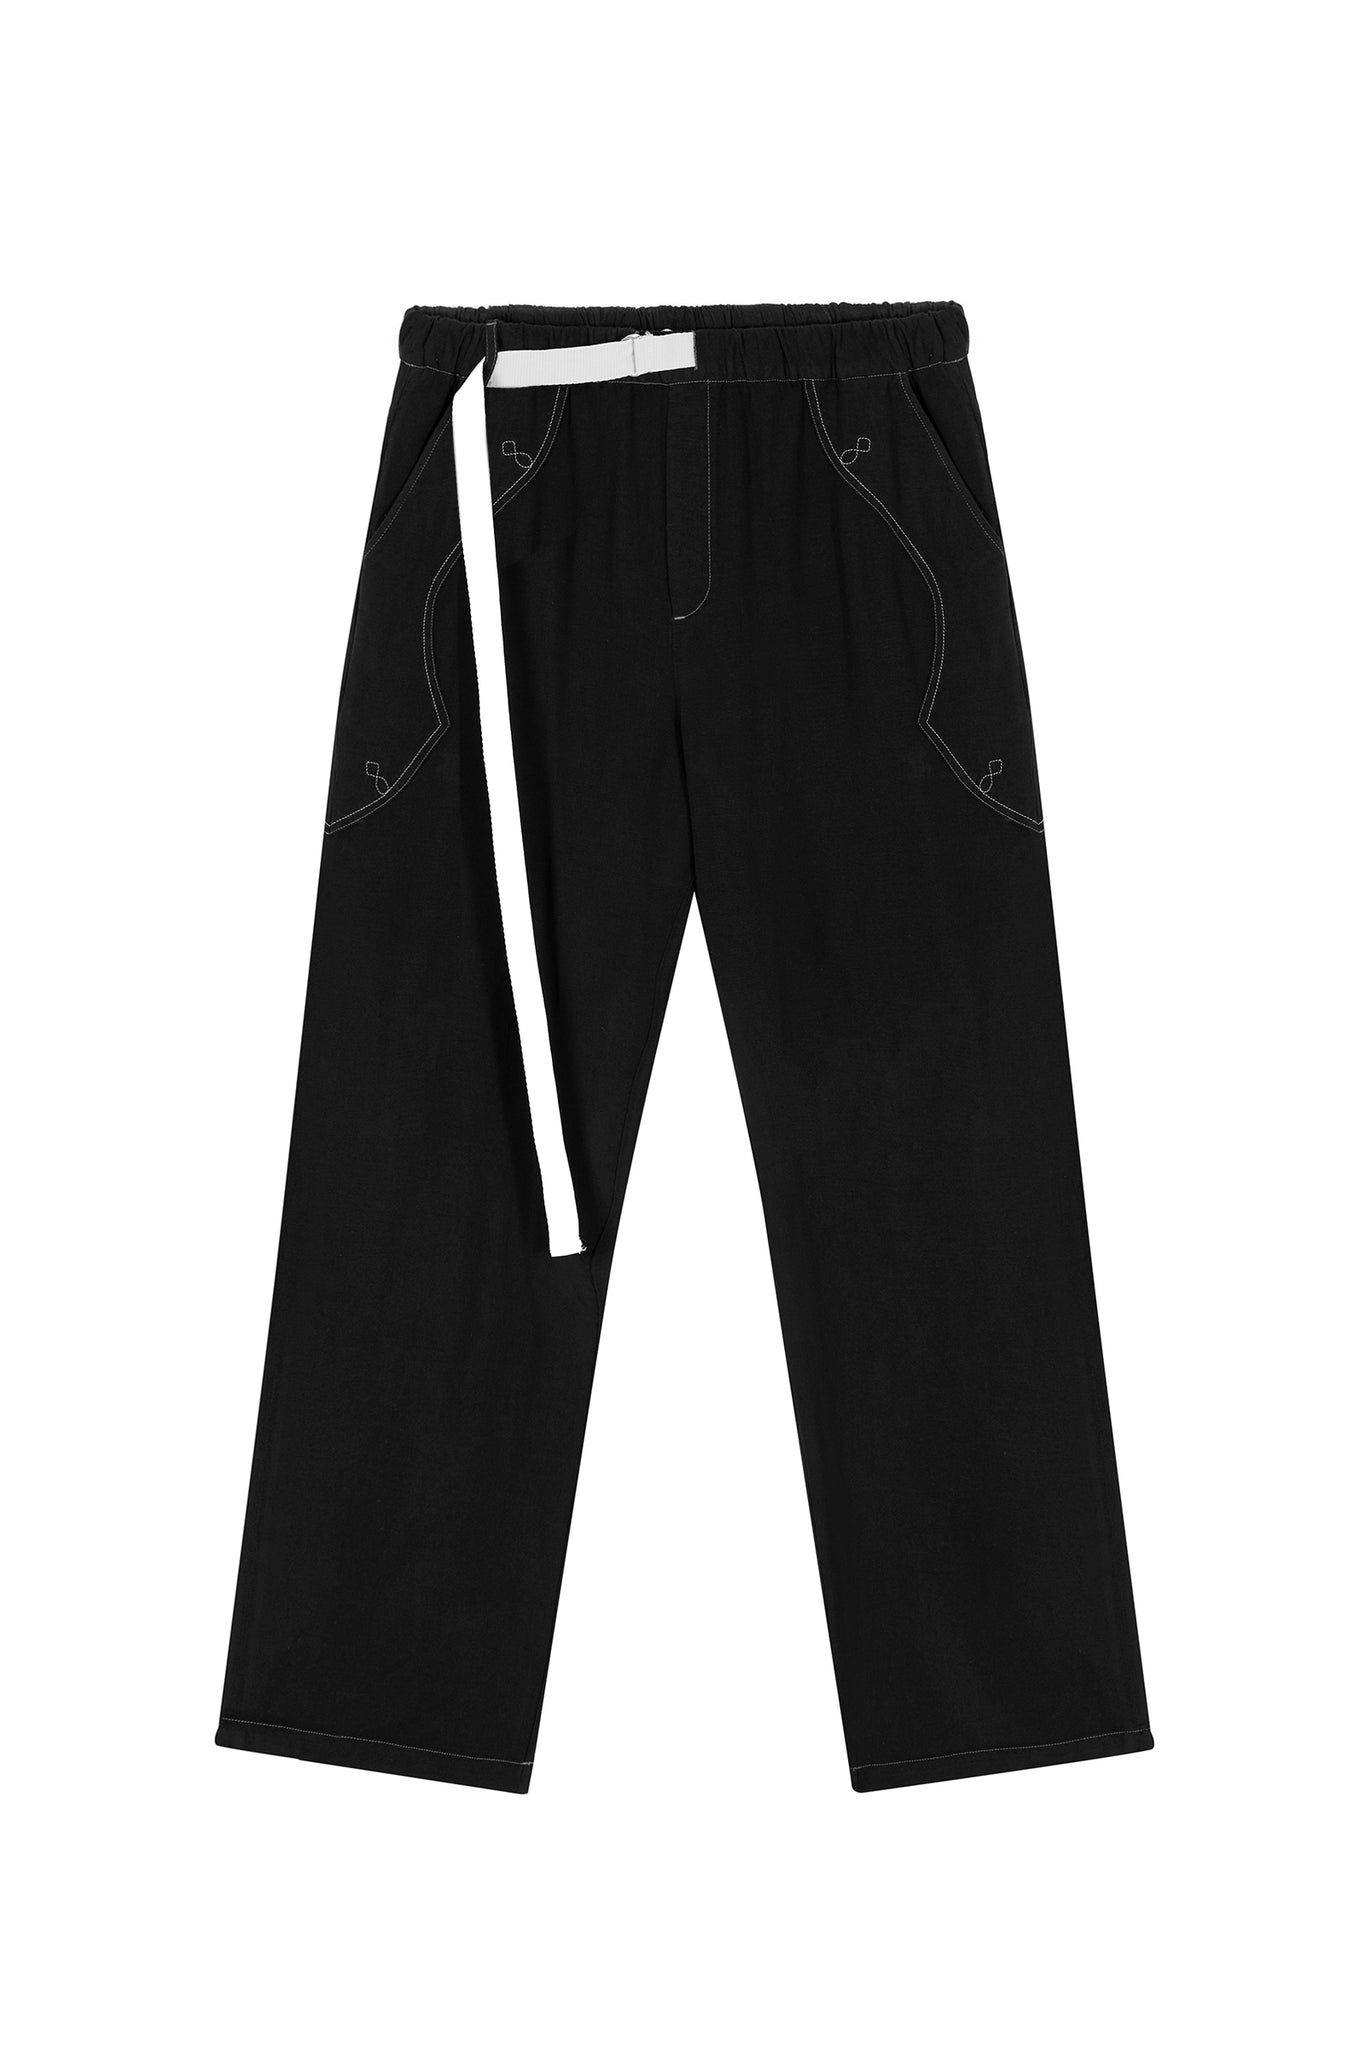 THE WESTERN CLIMBING PANTS IN BLACK